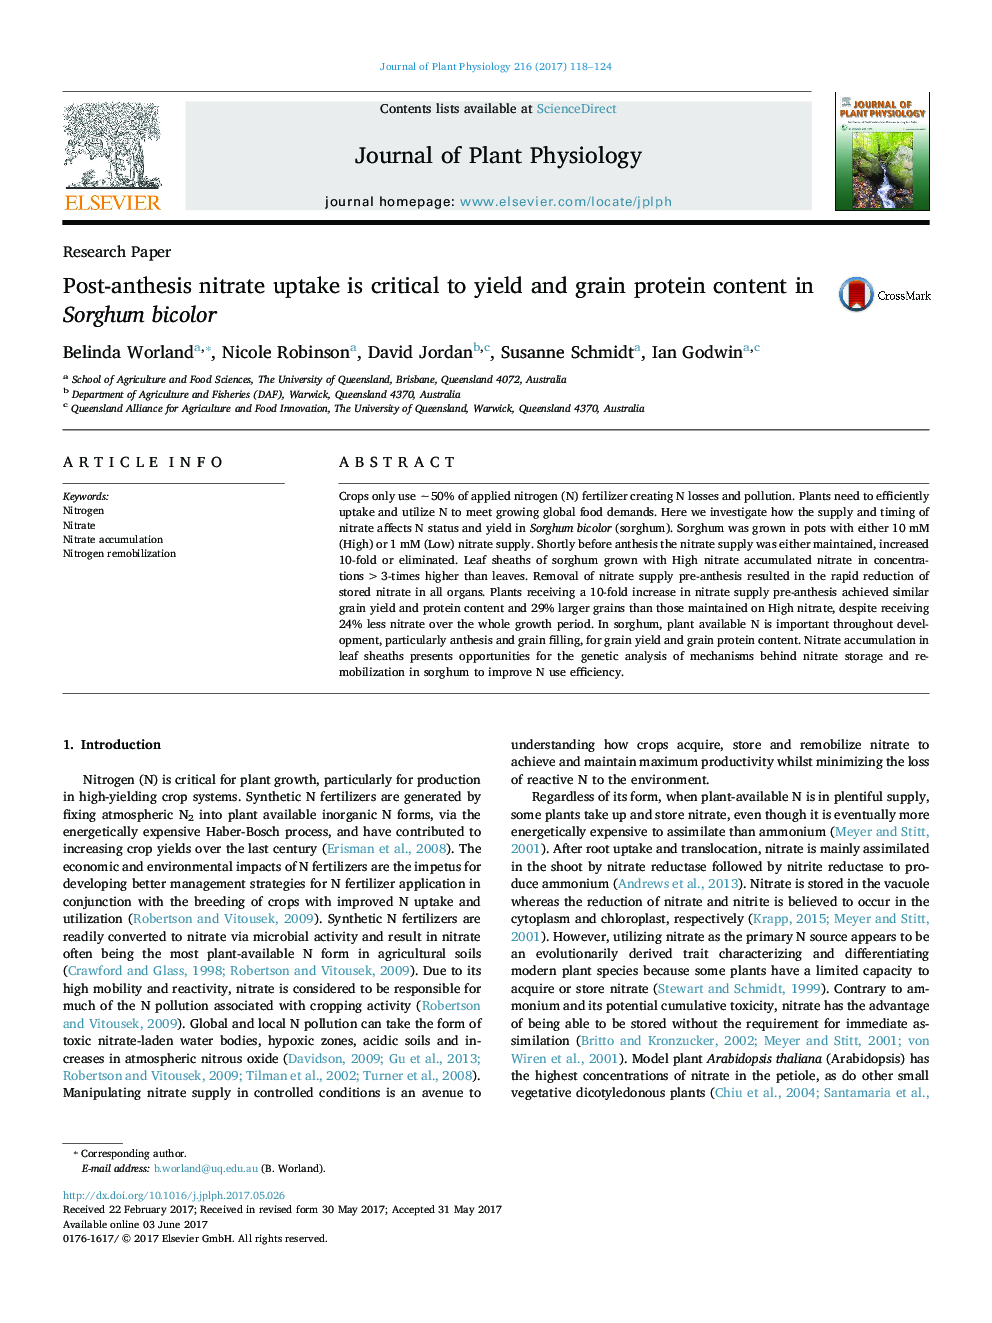 Research PaperPost-anthesis nitrate uptake is critical to yield and grain protein content in Sorghum bicolor